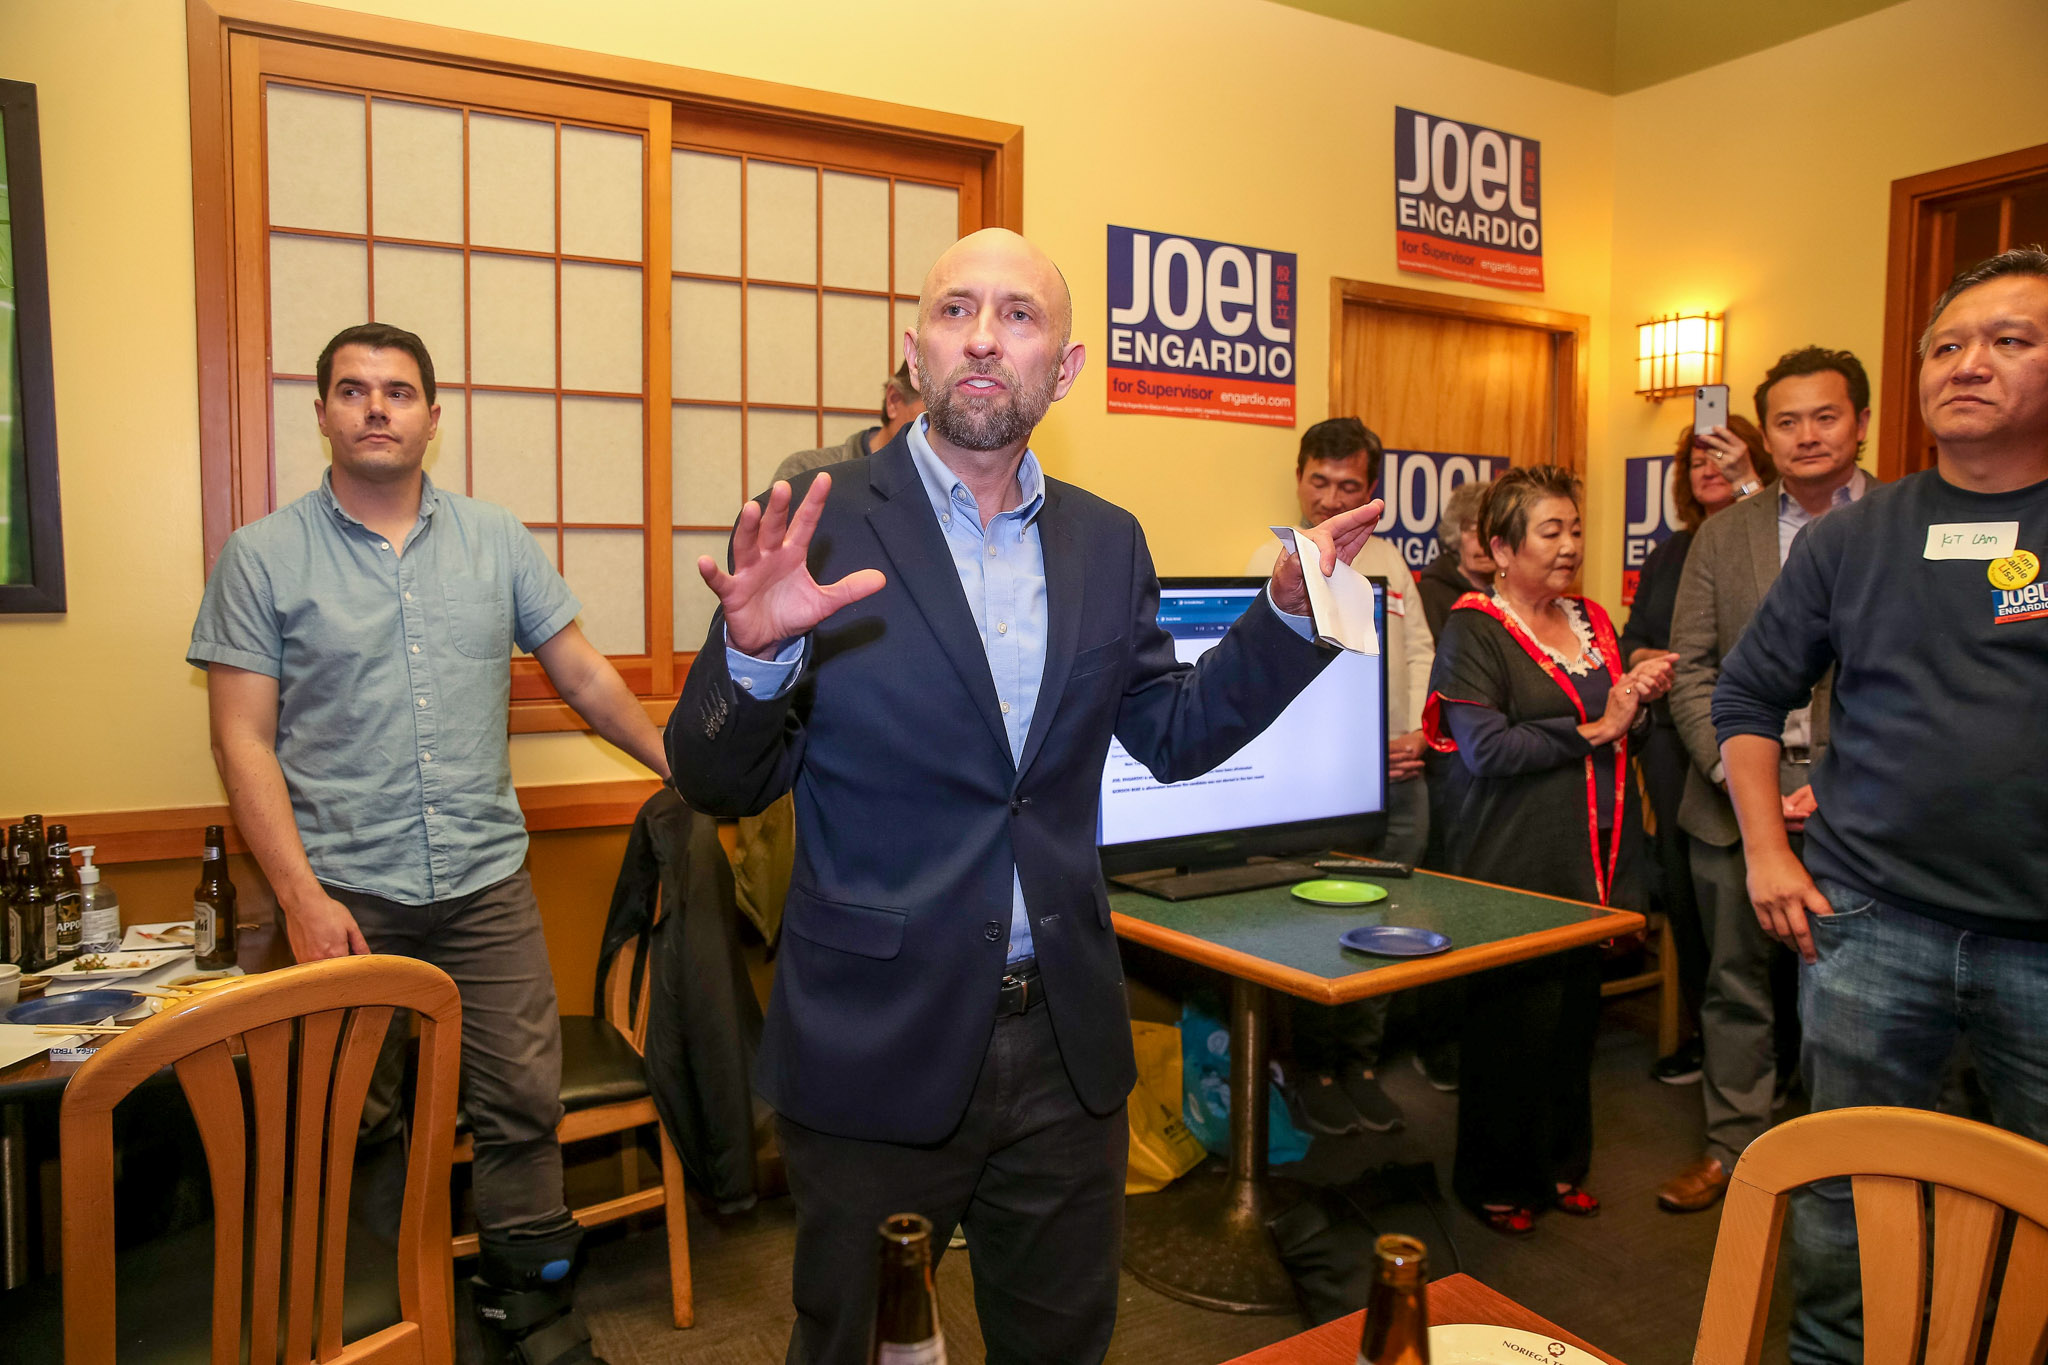 Engardio Leads Mar, but SF Sunset Supervisor’s Race Still Too Close To Call